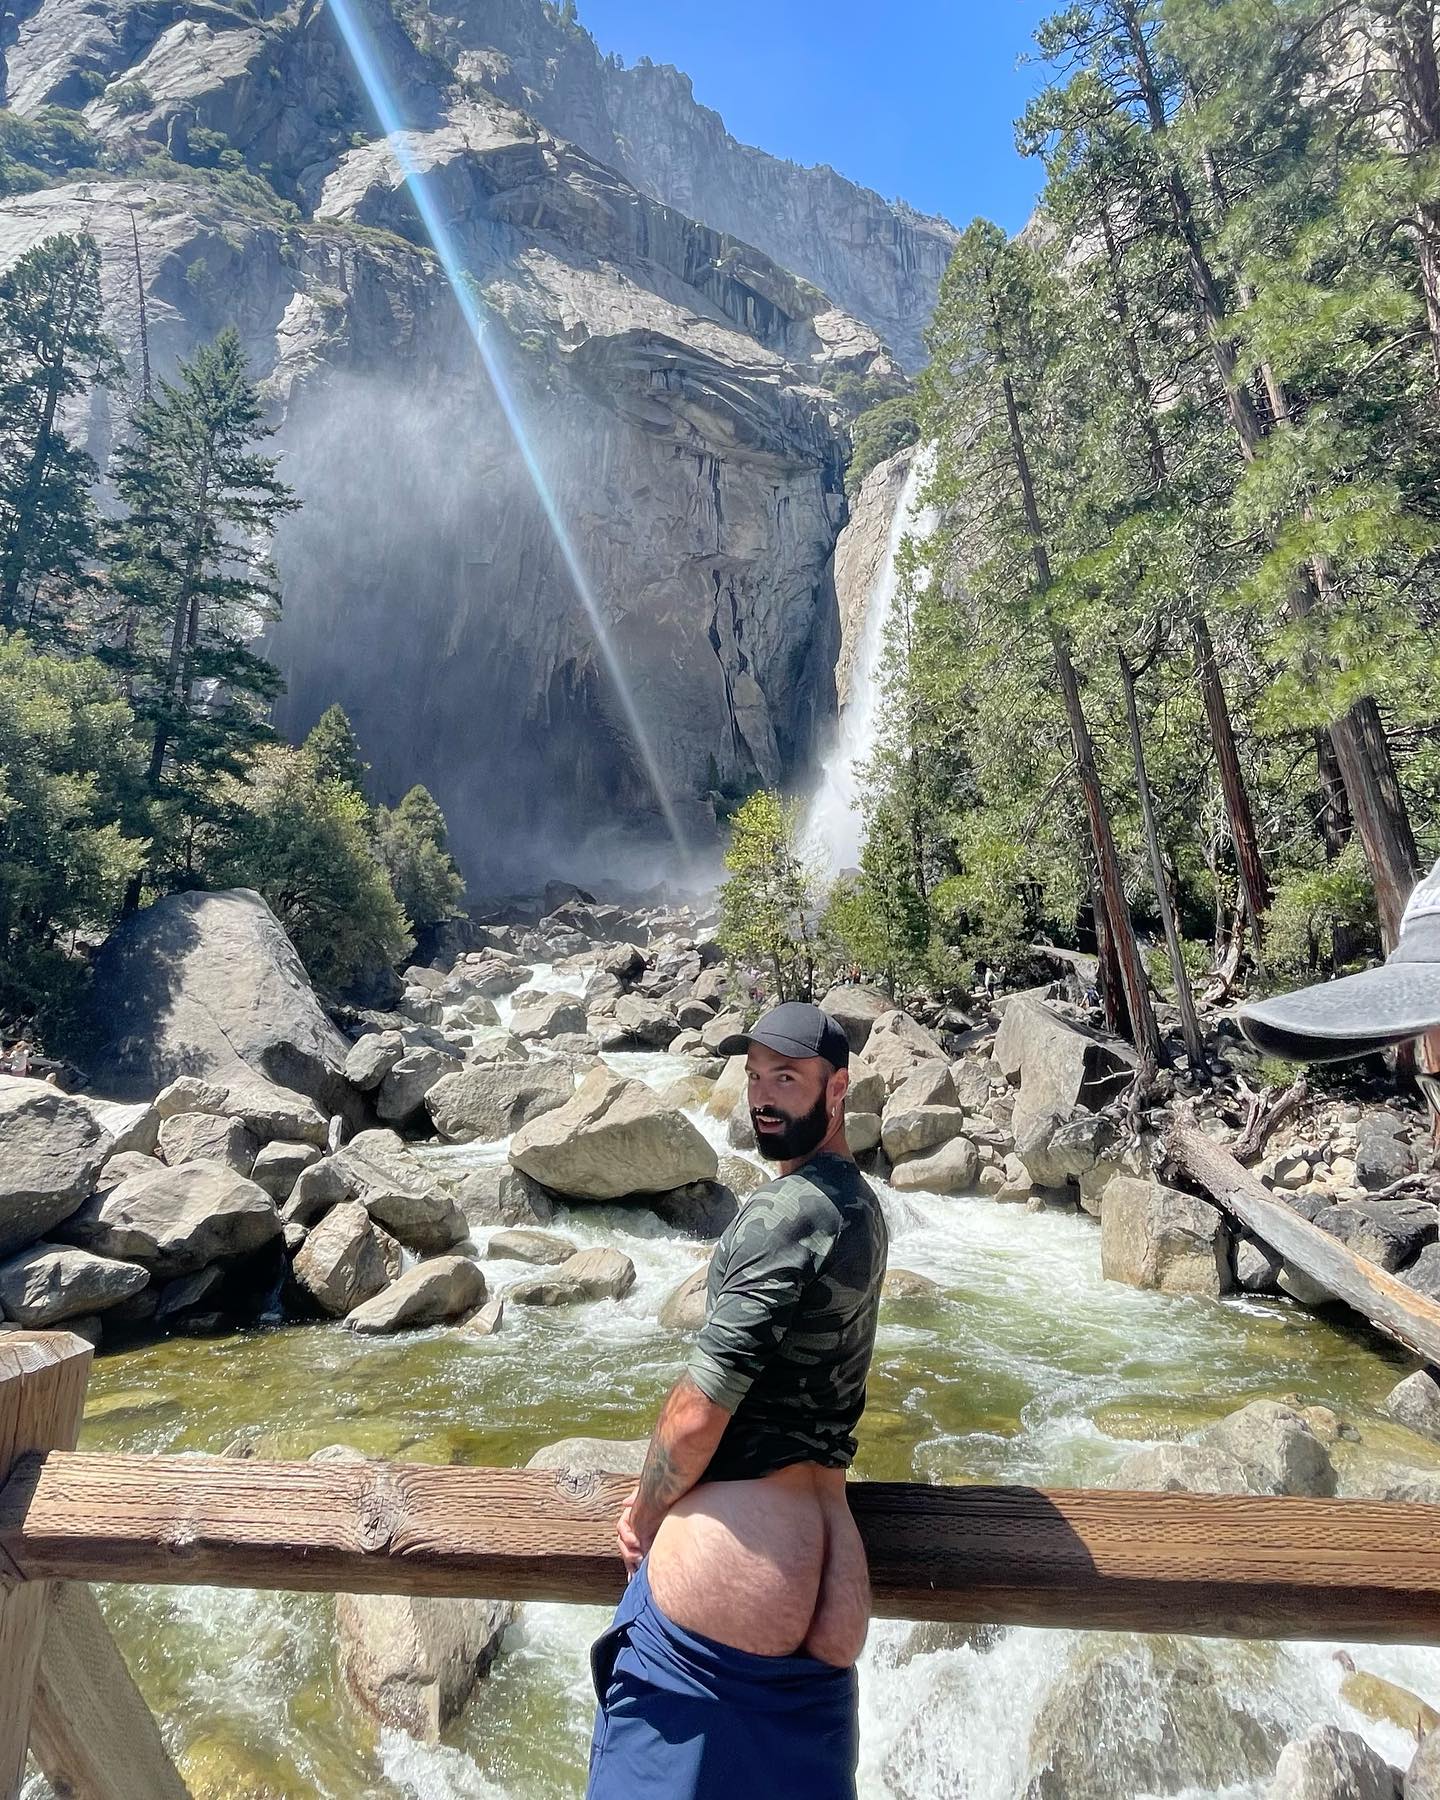 Yosemite was very wet and gay 🏞